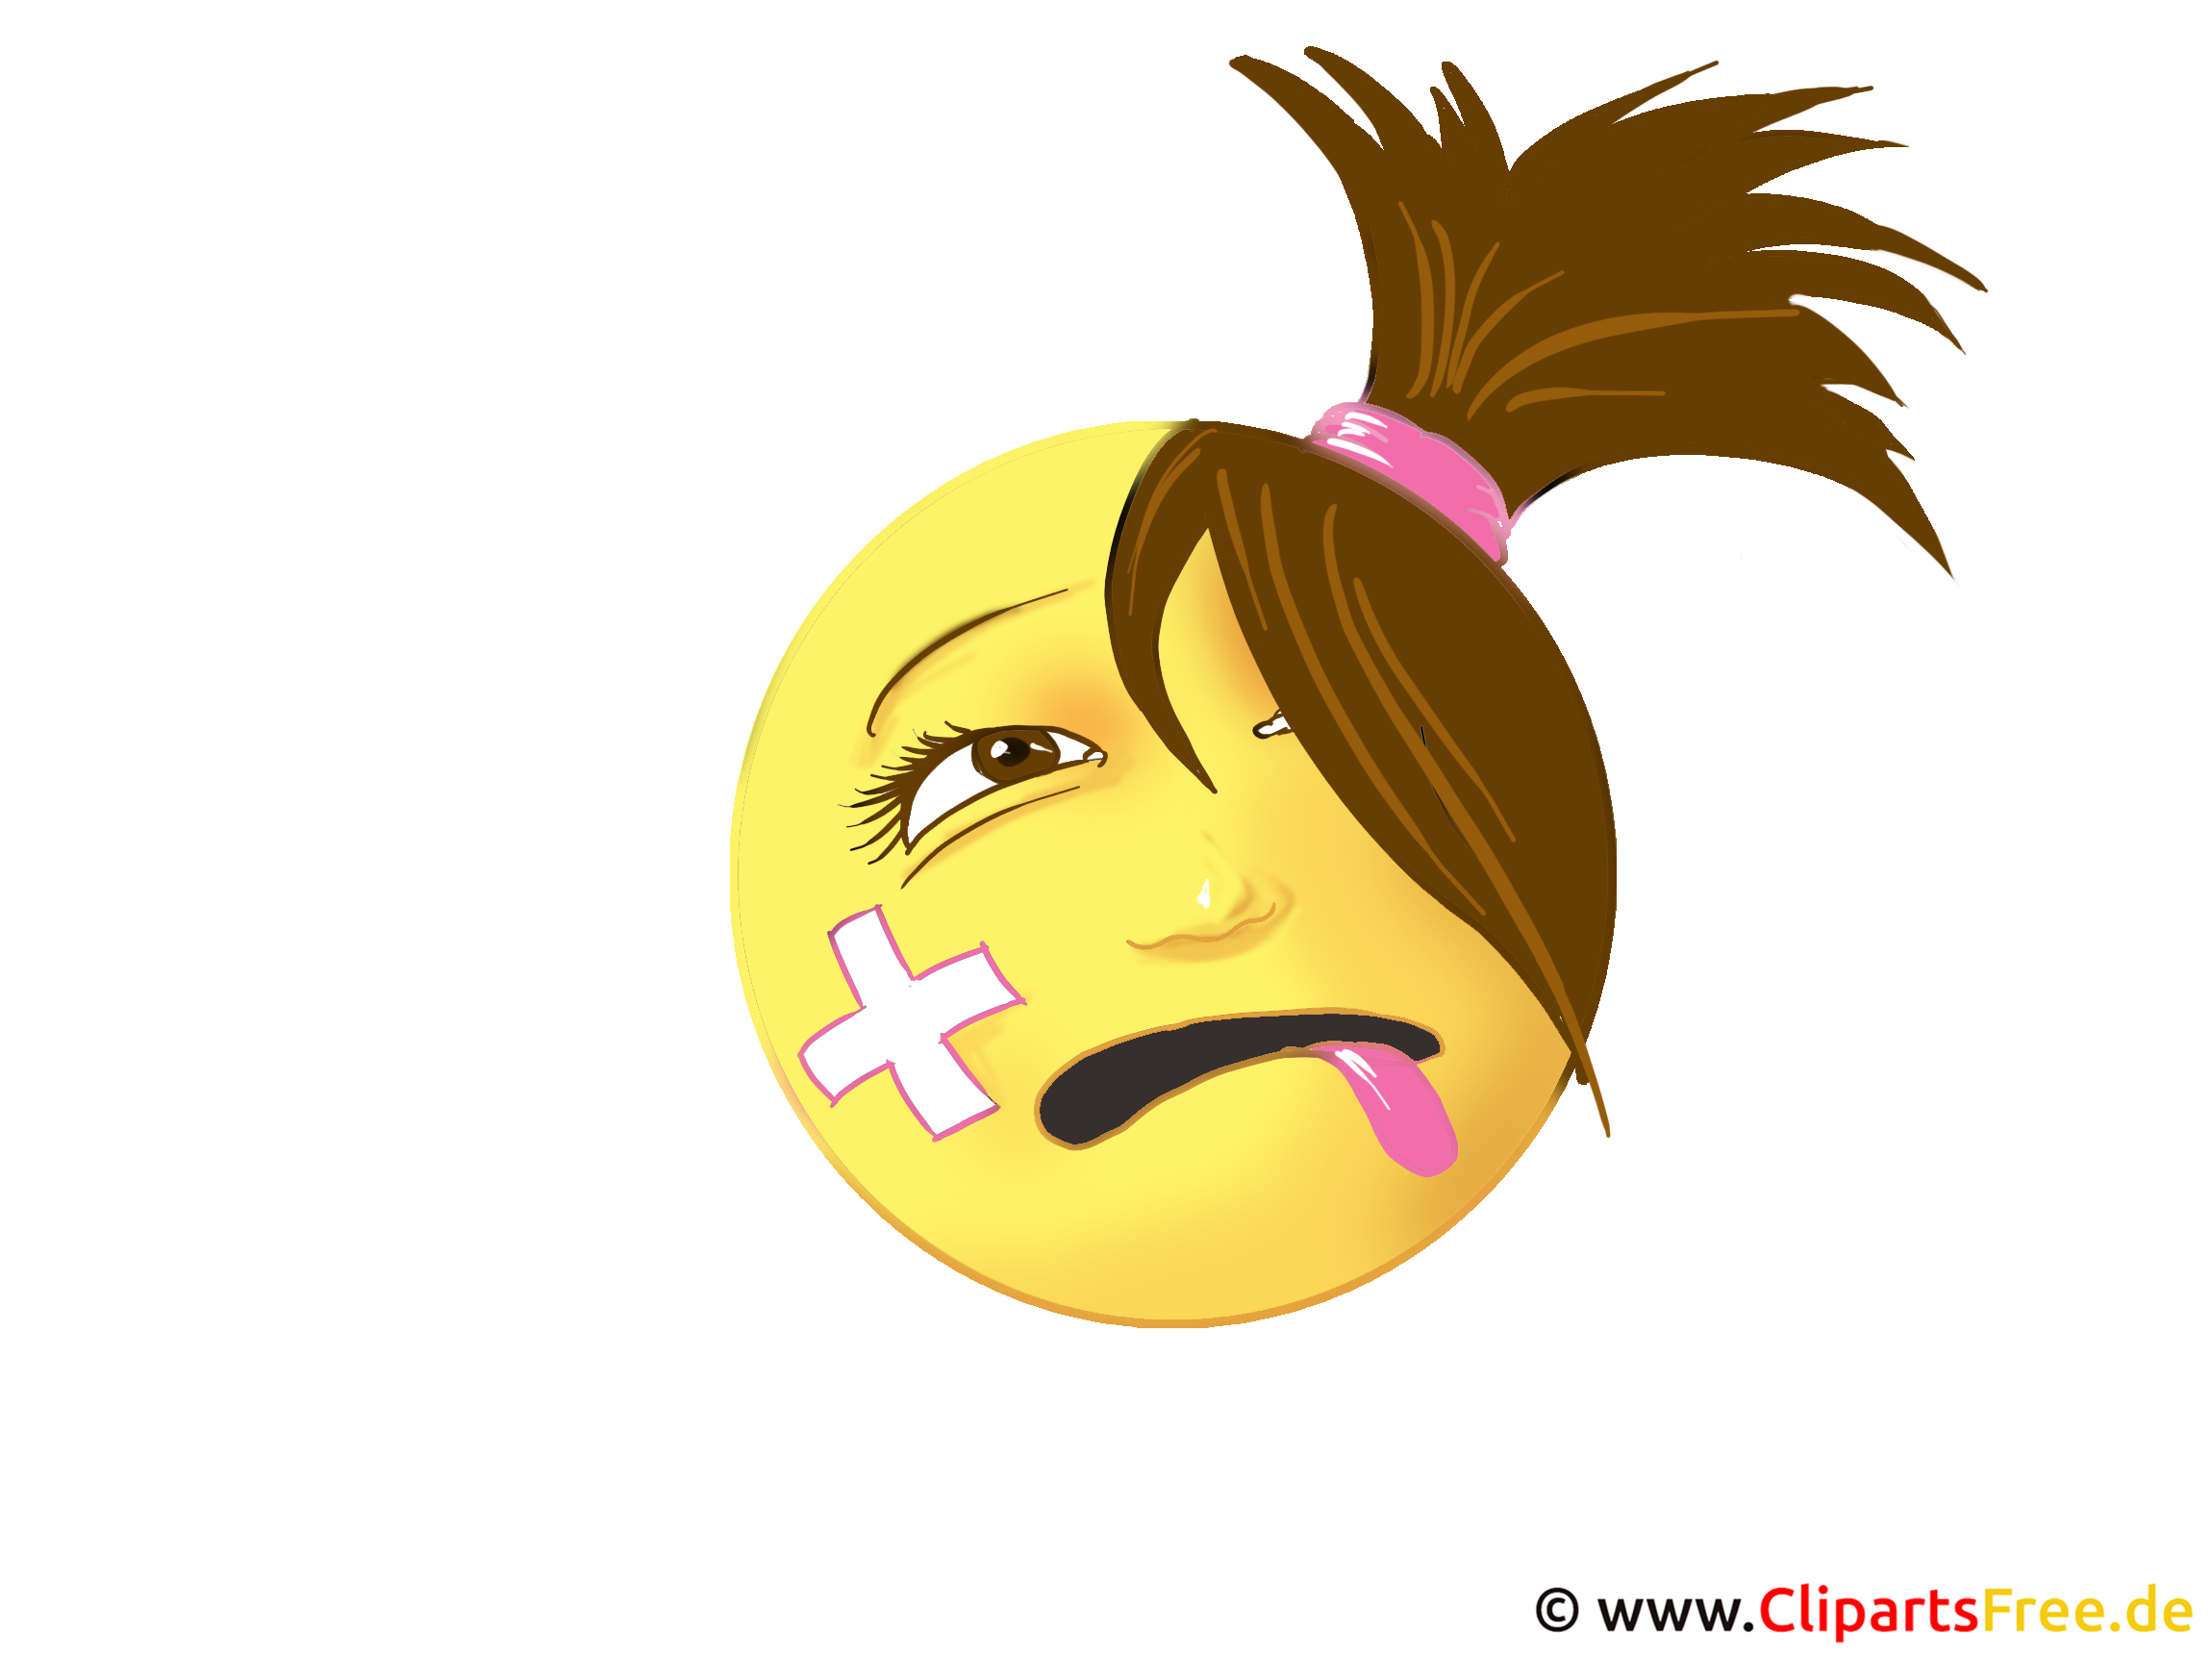 clipart smiley traurig - photo #1